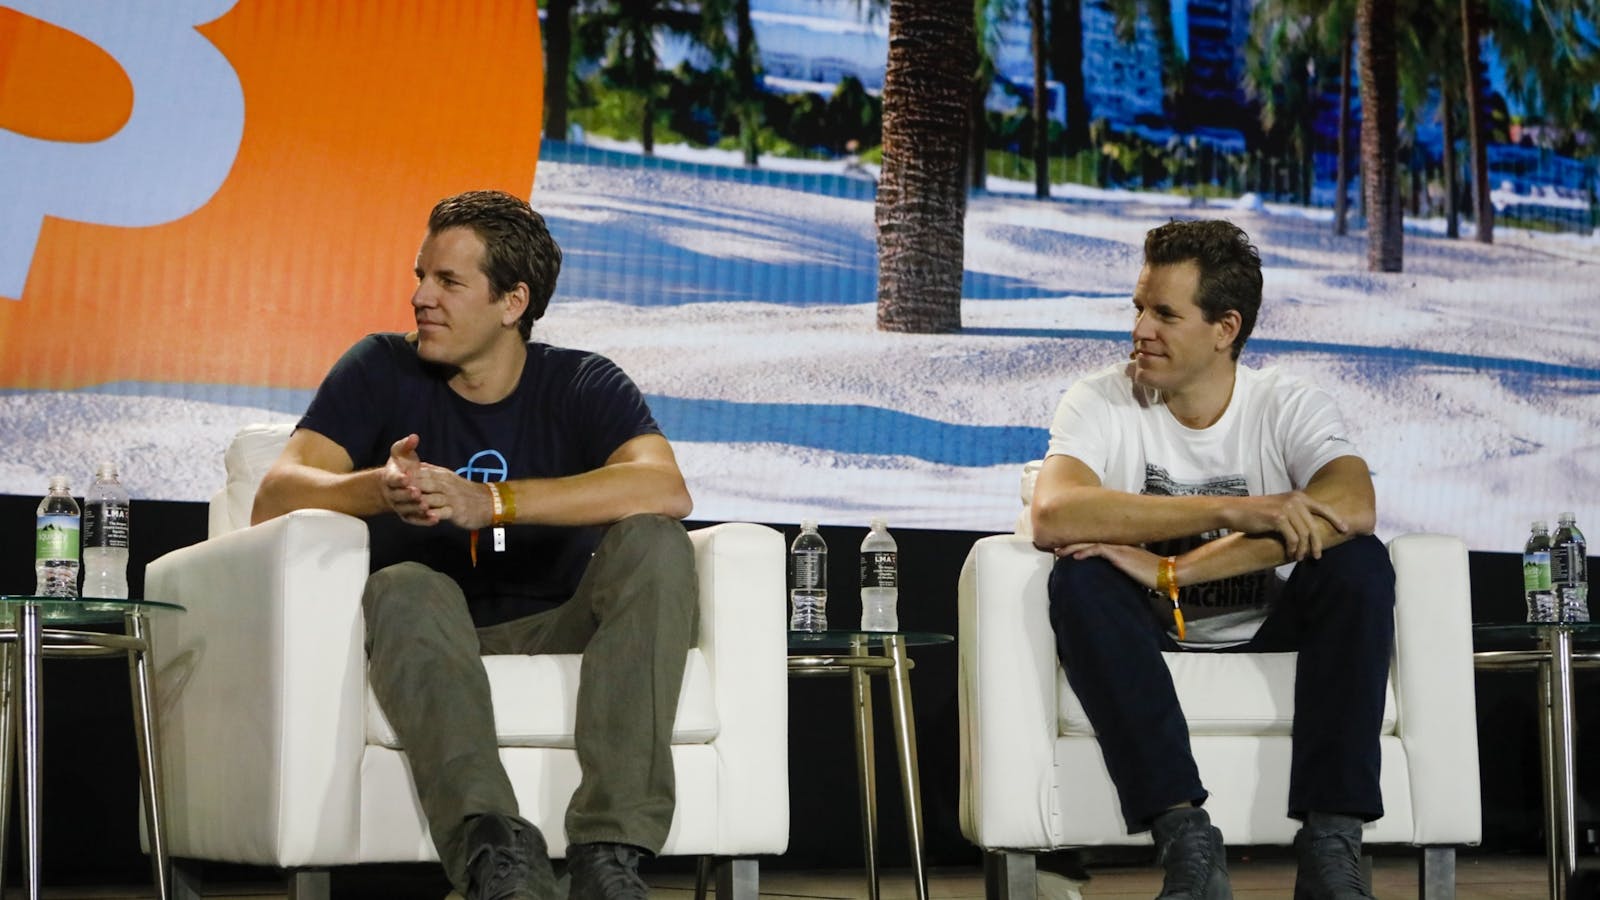 Gemini founders Tyler Winklevoss, left, and Cameron Winklevoss at a Bitcoin conference in 2021 in Miami. Photo by Bloomberg